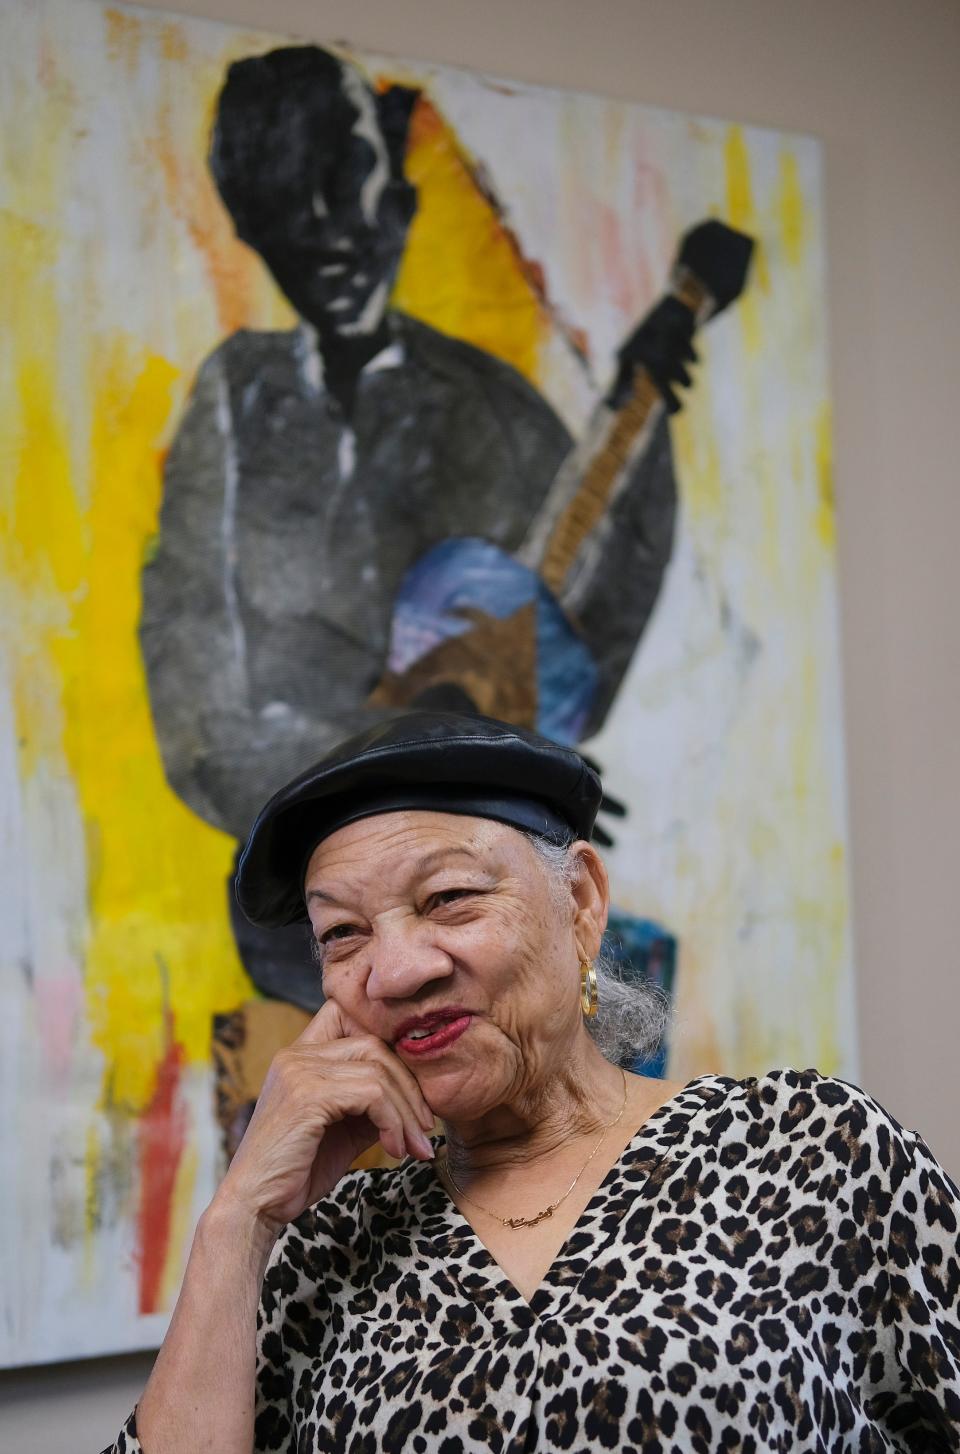 Anita Arnold is the executive director of Oklahoma City's Black Liberated Arts Center. Behind her is a painting of Charlie Christian, legendary jazz guitarist with the Benny Goodman orchestra — "the greatest musician ever to come out of Oklahoma, African American or otherwise," she says.